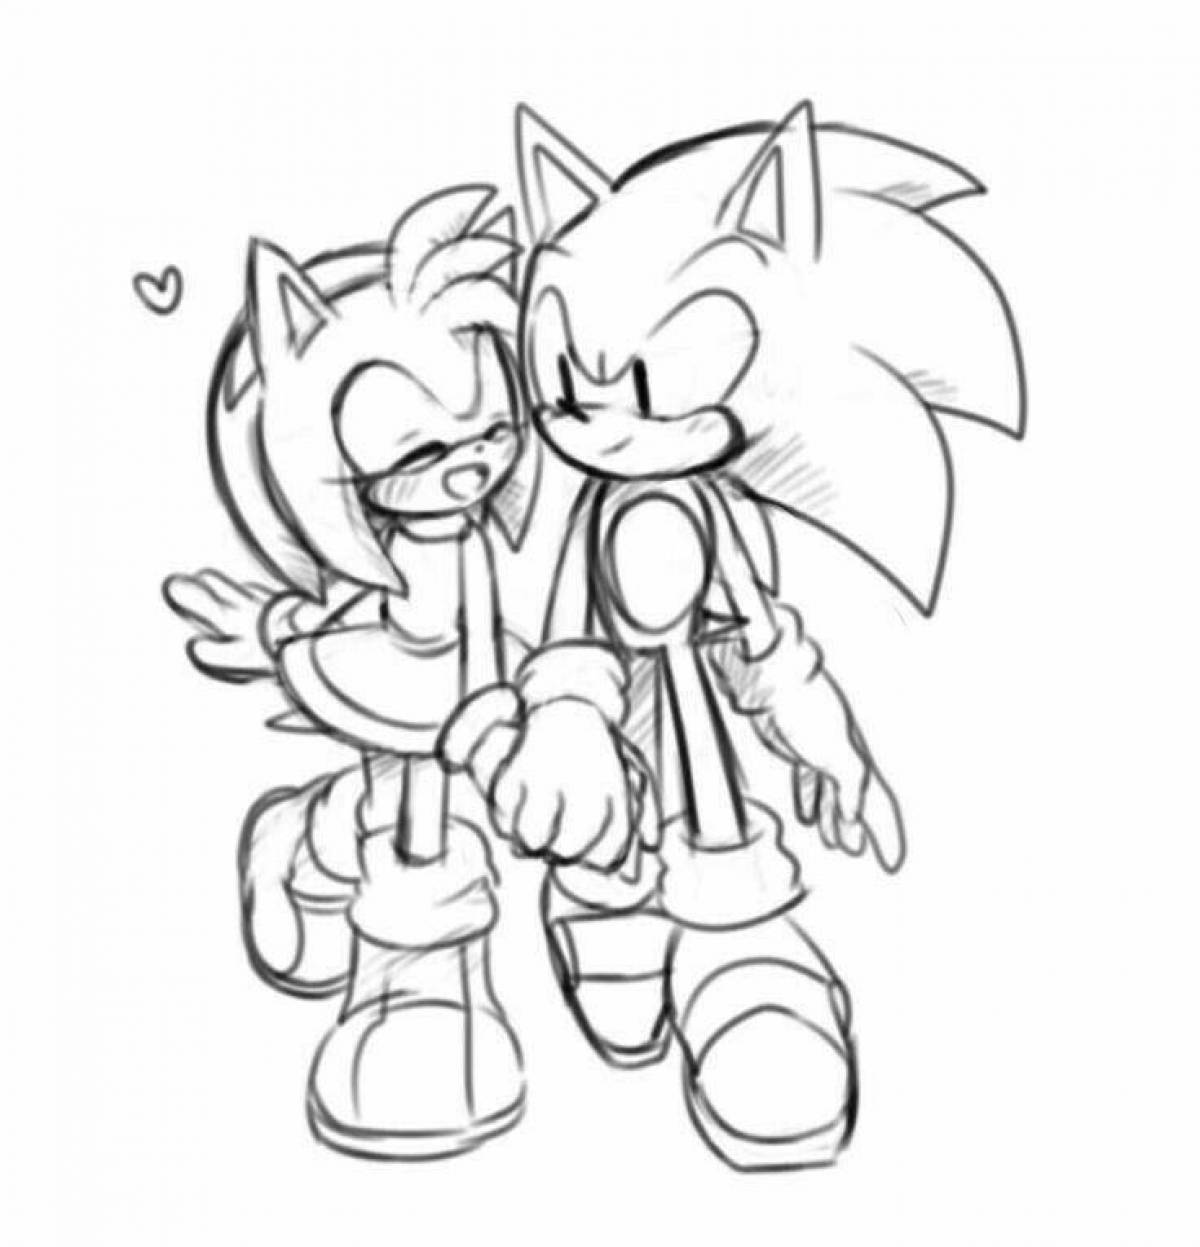 Animated sonic and amy rose coloring book